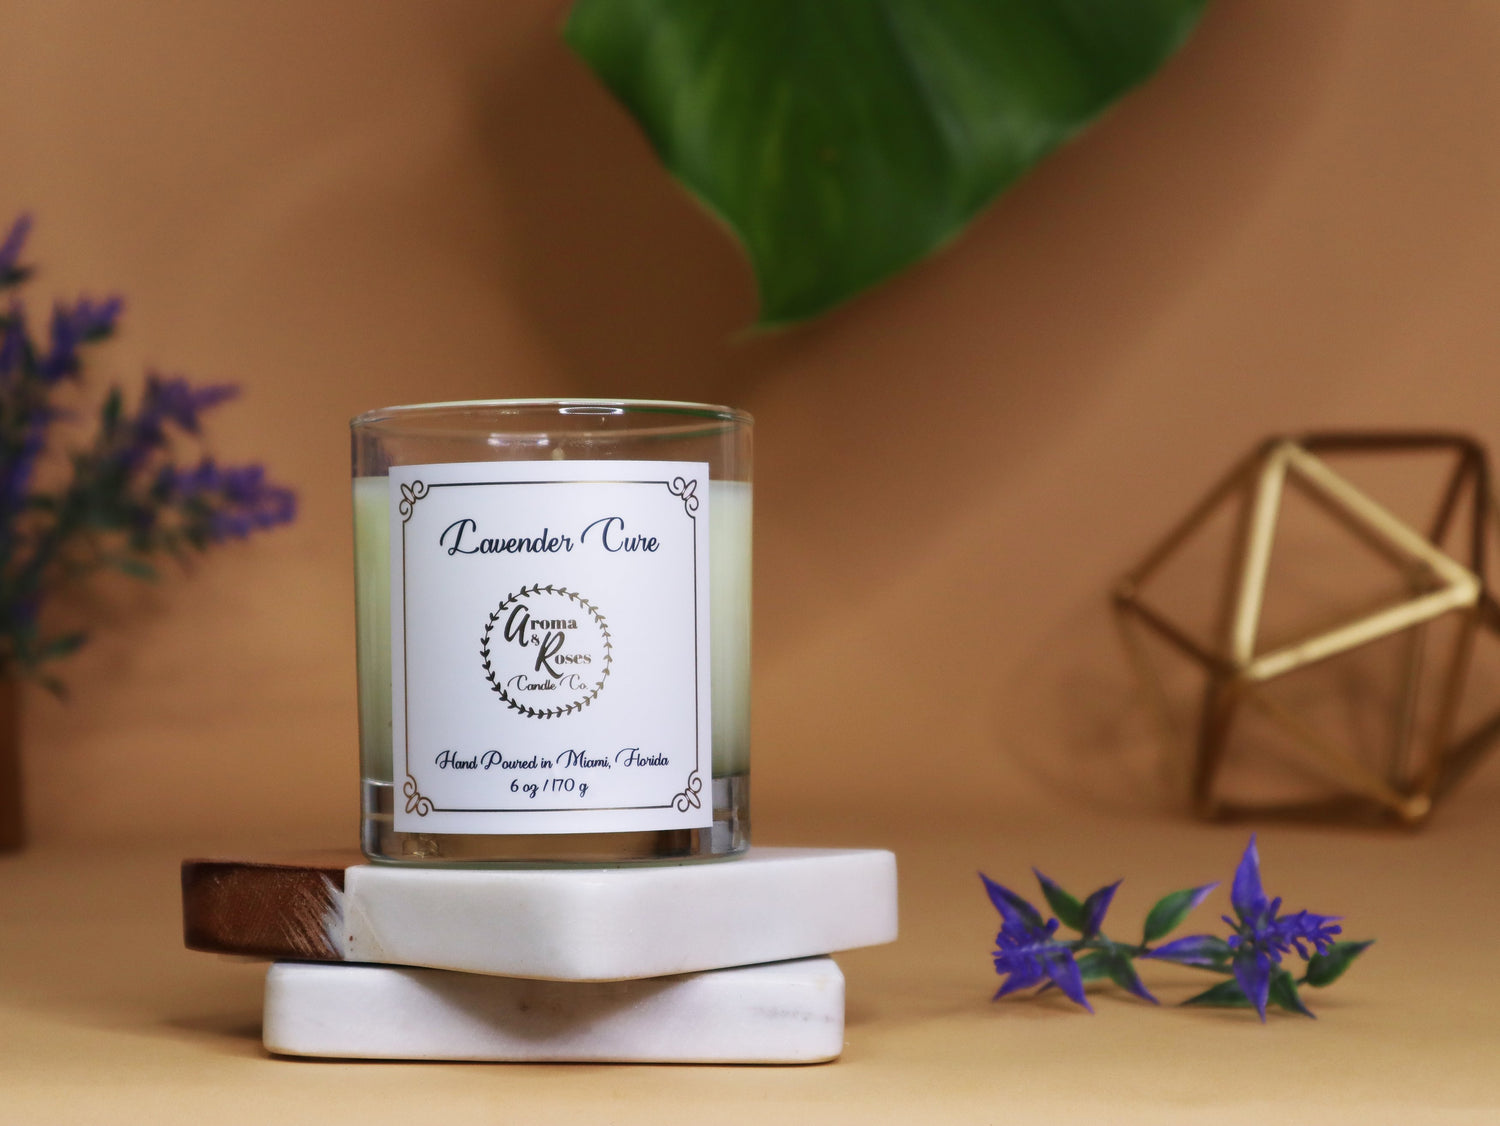 Lavender Cure Candle - aromaandrosescandle